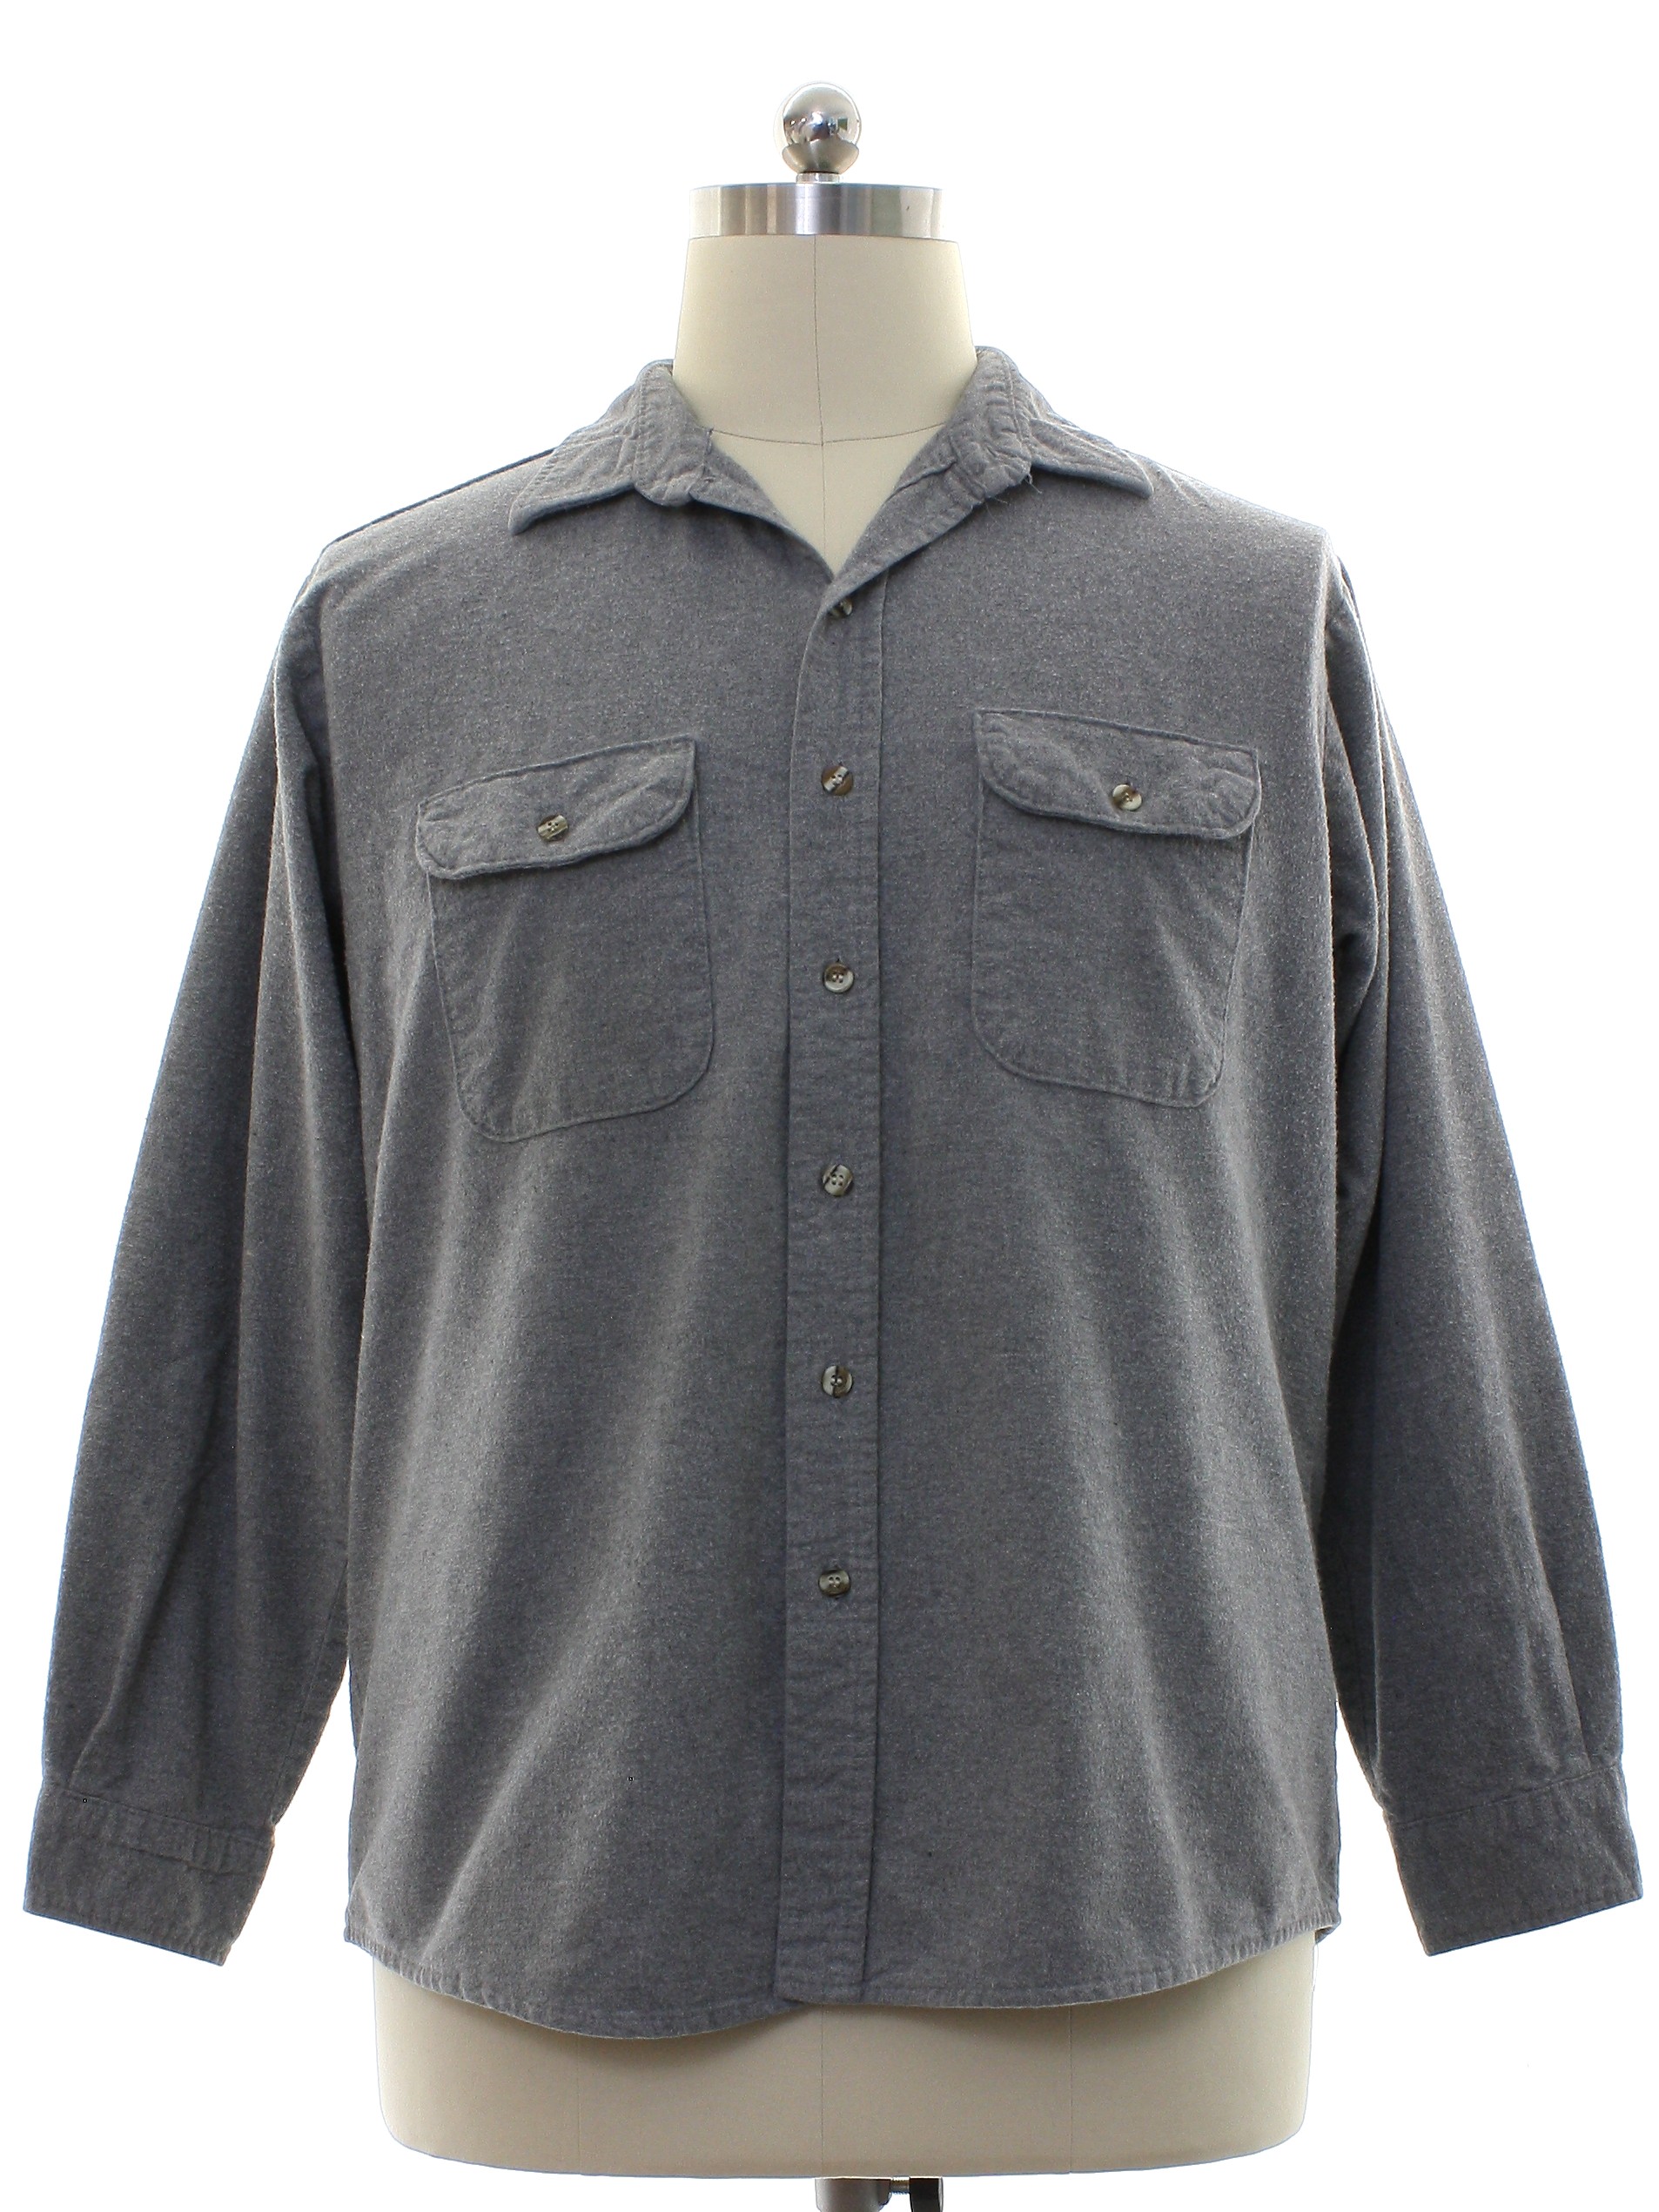 Five Brothers TallMan 90's Vintage Shirt: 90s or newer -Five Brothers ...